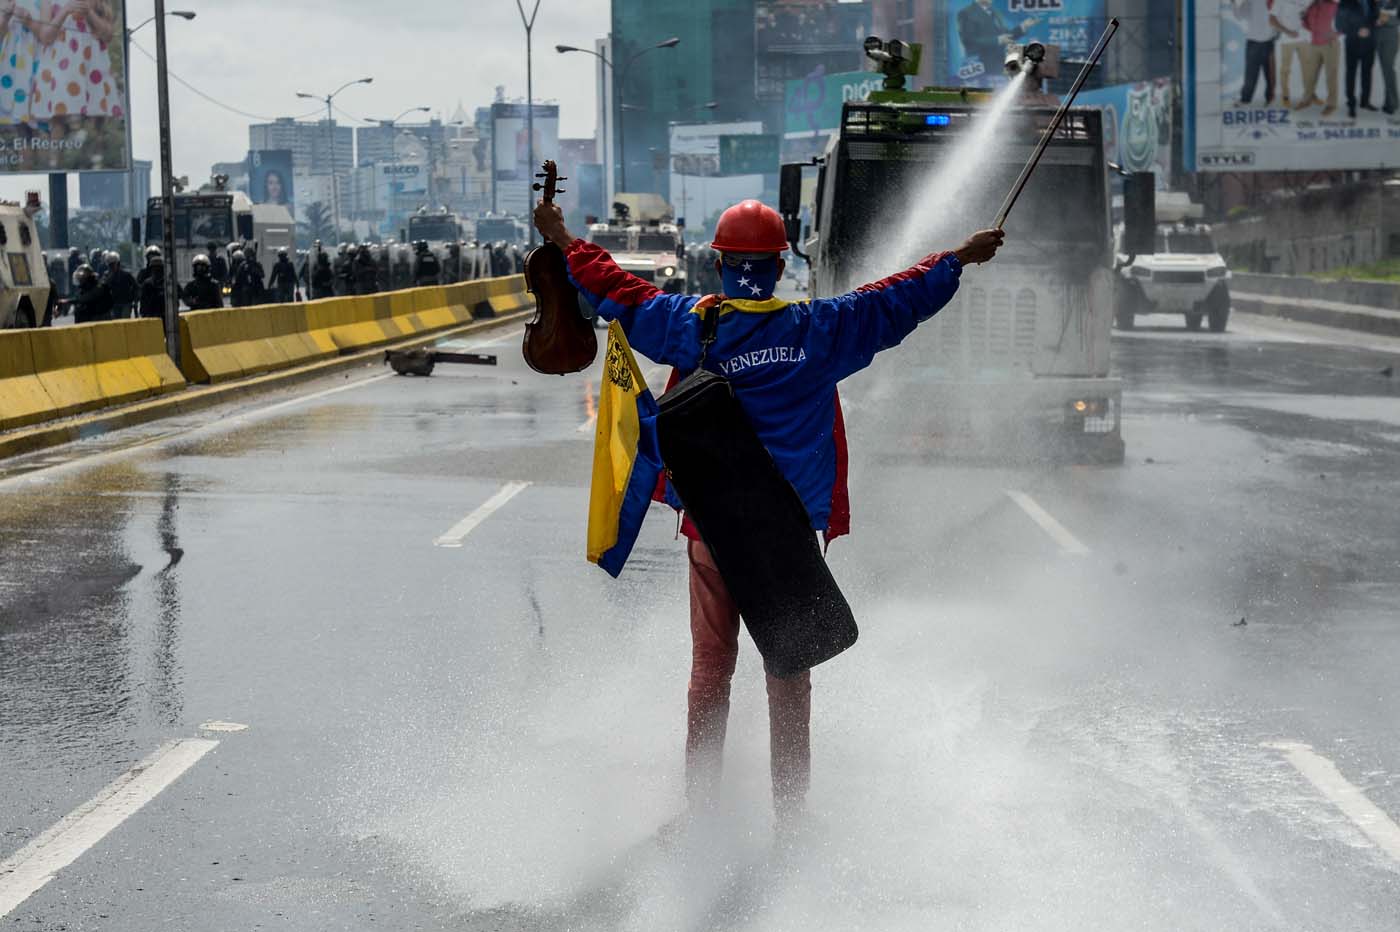 (FILES) This file photo taken on May 24, 2017 shows opposition activist Wuilly Arteaga standing with a violin in front of an armoured vehicle of the riot police during a protest against President Nicolas Maduro in Caracas, on May 24, 2017. "I felt very afraid. I didn't think music had so much power to make people think," he told AFP. "But after the cemetery, I went along to the demonstration with more courage." / AFP PHOTO / FEDERICO PARRA